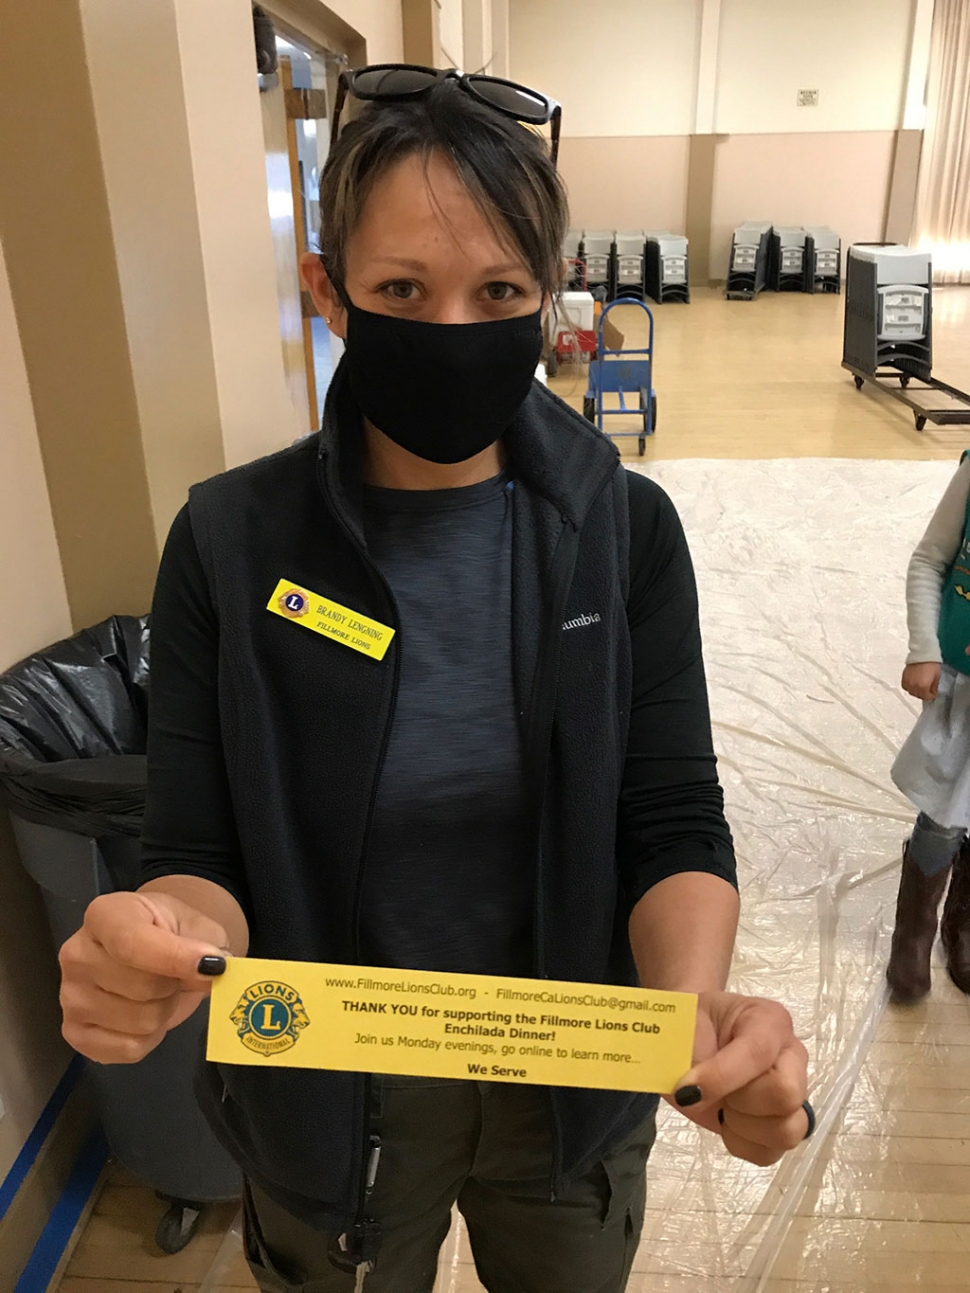 Lion Club member Brandy Lengning holding up a thank you slip.